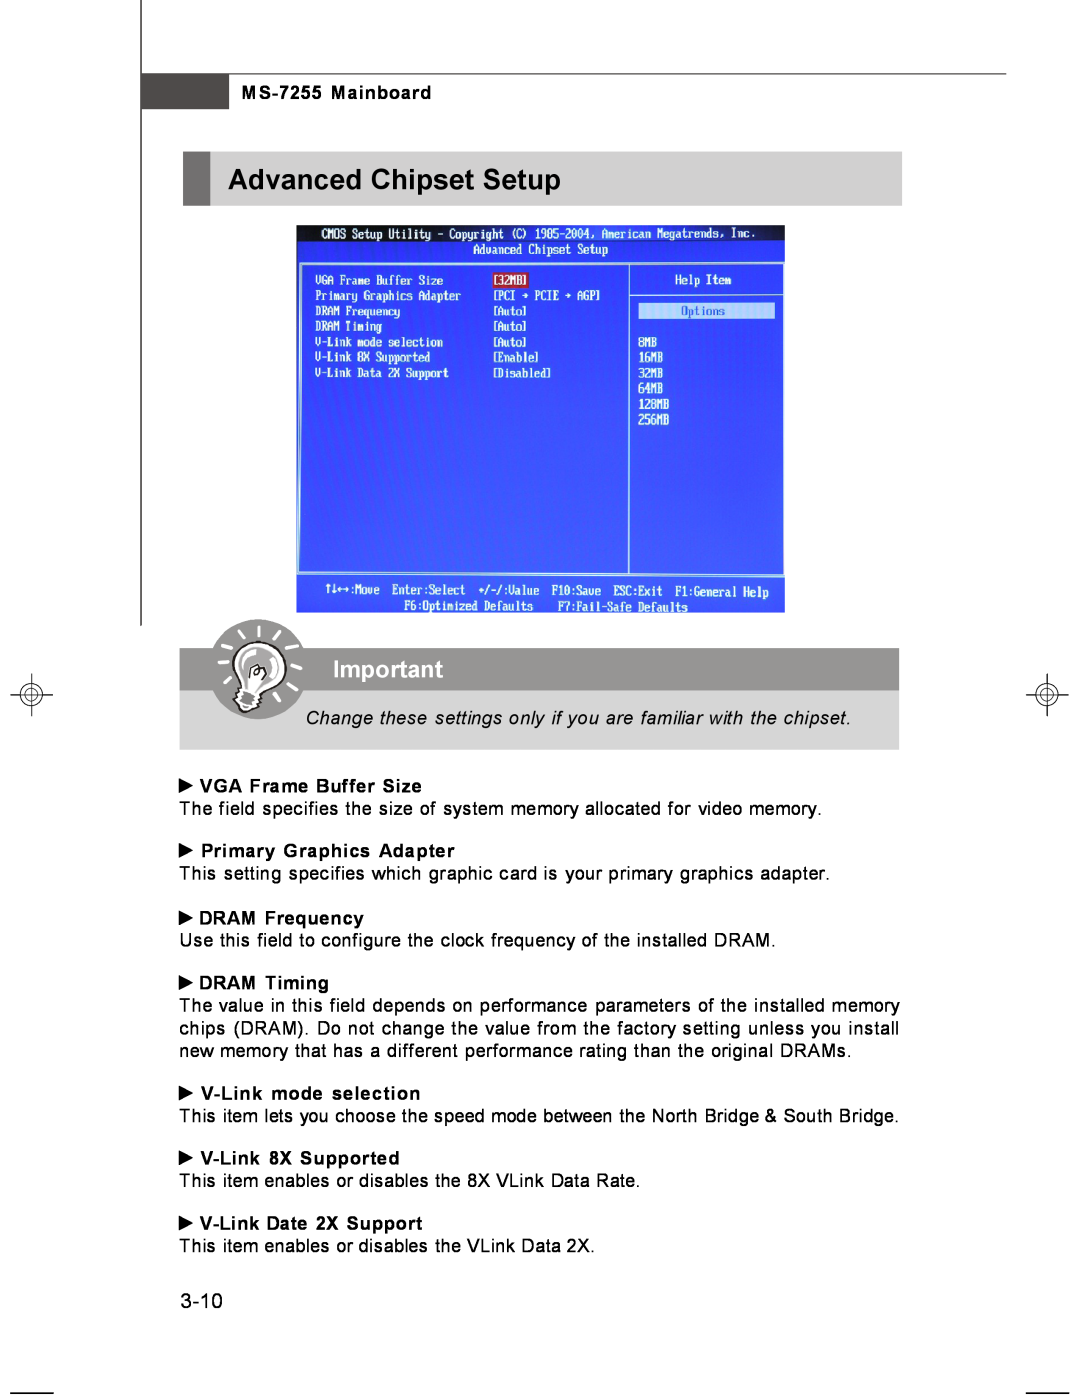 MSI MS-7255 Advanced Chipset Setup, 3-10, Change these settings only if you are familiar with the chipset, DRAM Frequency 